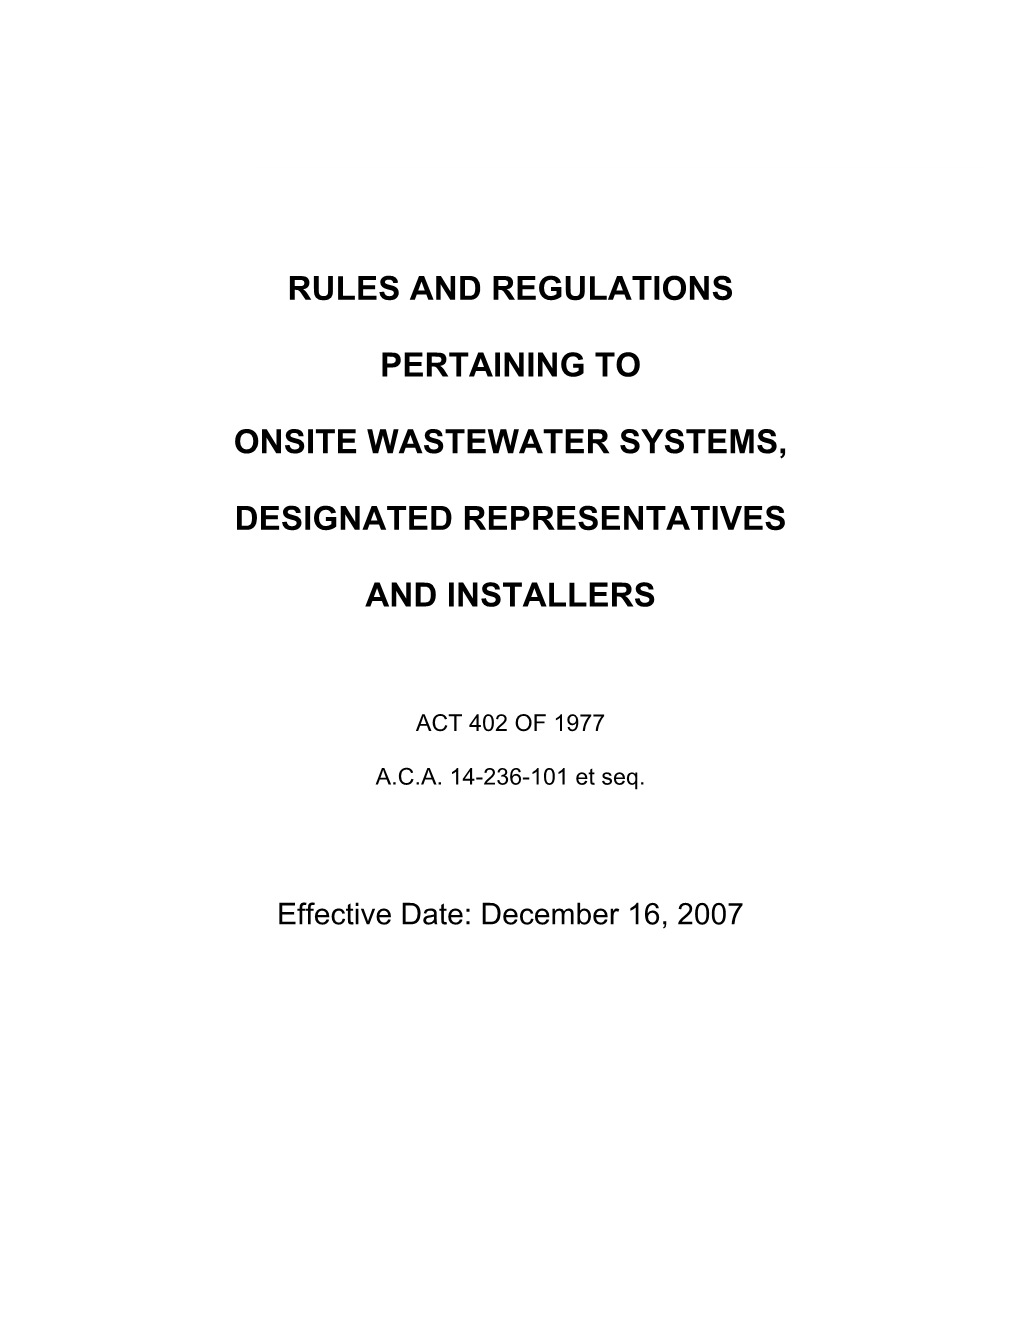 Rules and Regulations Pertaining to Onsite Wastewater Systems